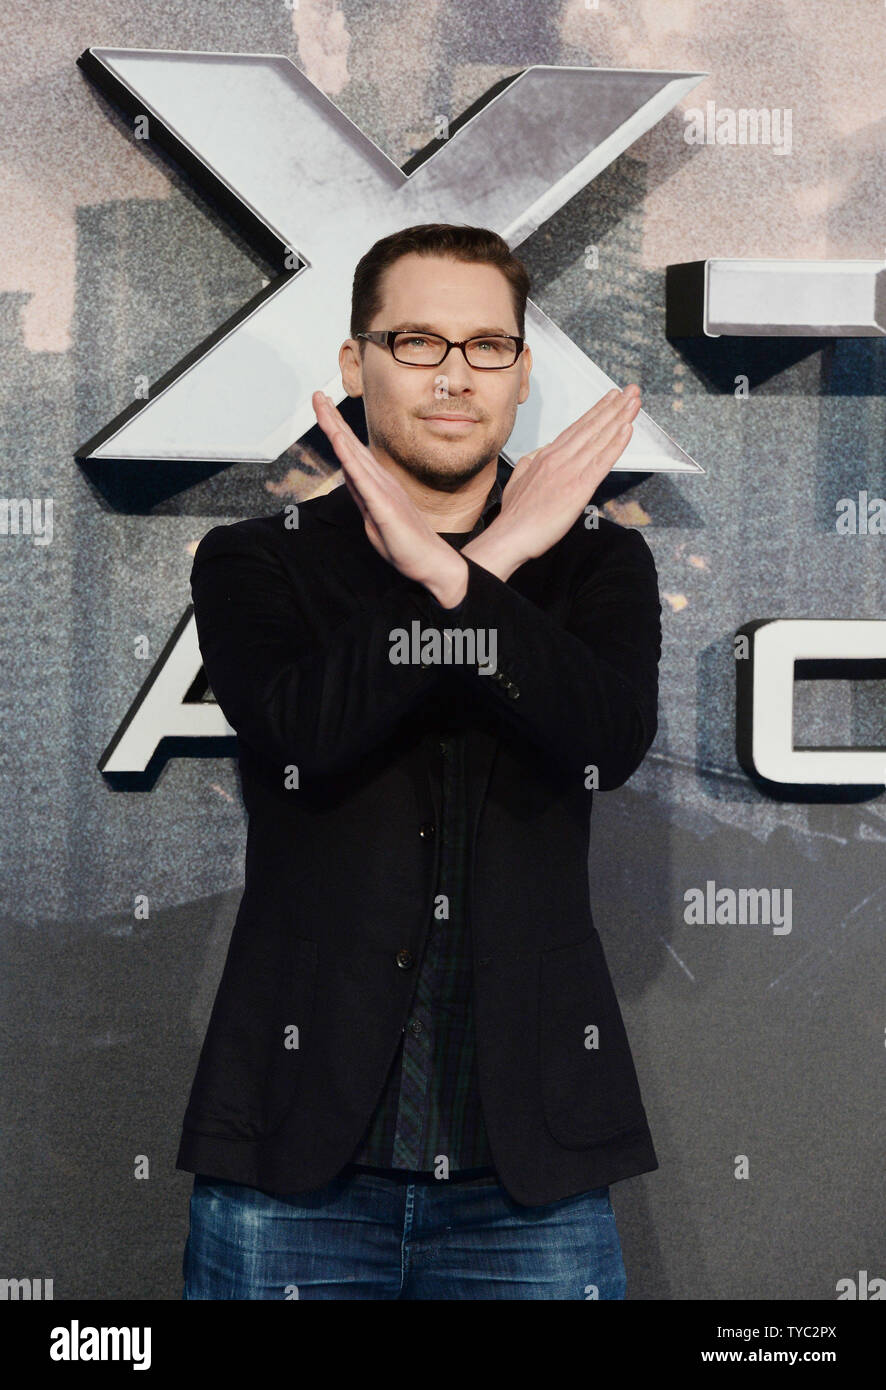 American director Bryan Singer attends the premiere of 'X- Men : Apocalypse' at the BFI Imax in London on May 9, 2016. Photo by Rune Hellestad/ UPI Stock Photo